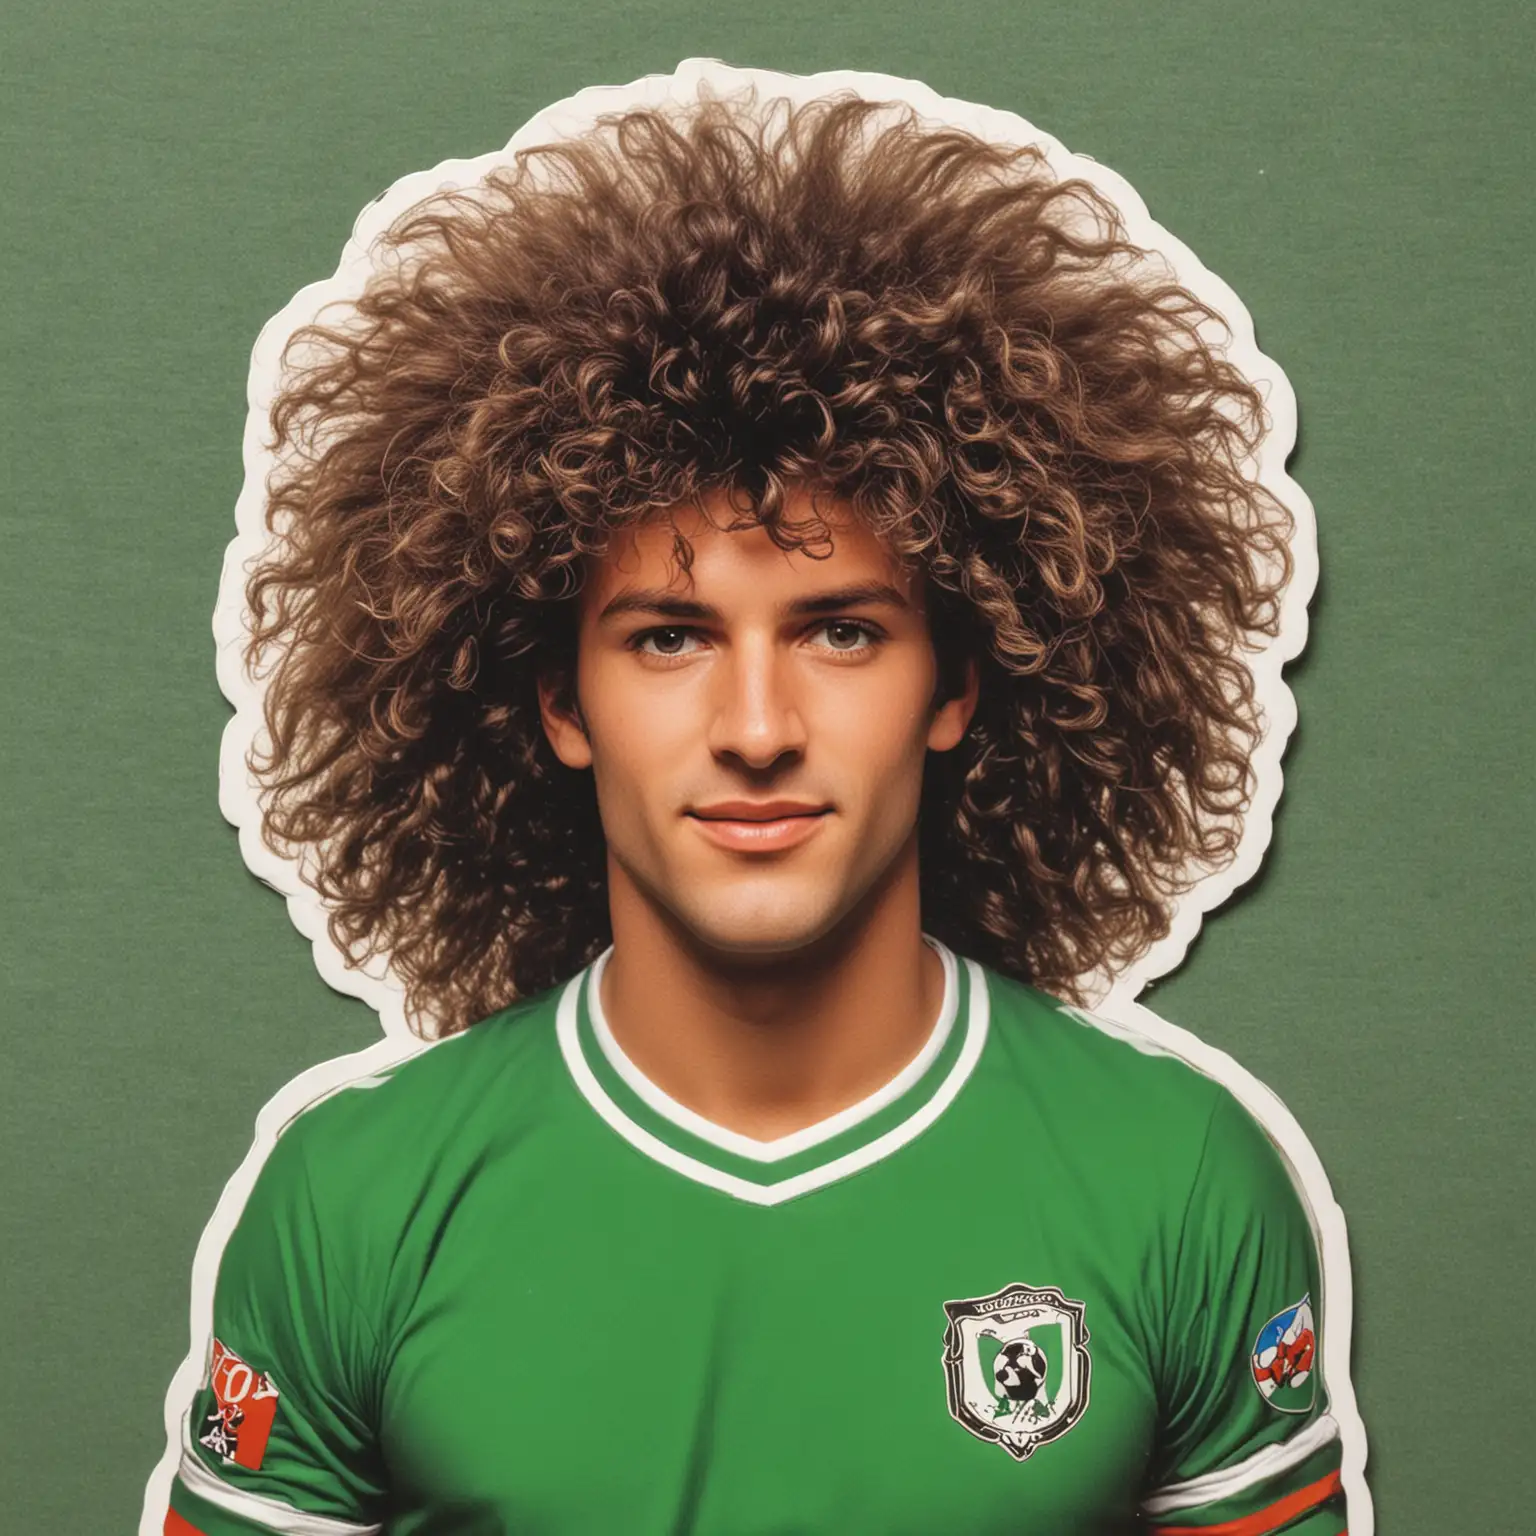 1980s Footballer with Big Hair in Green Team Kit